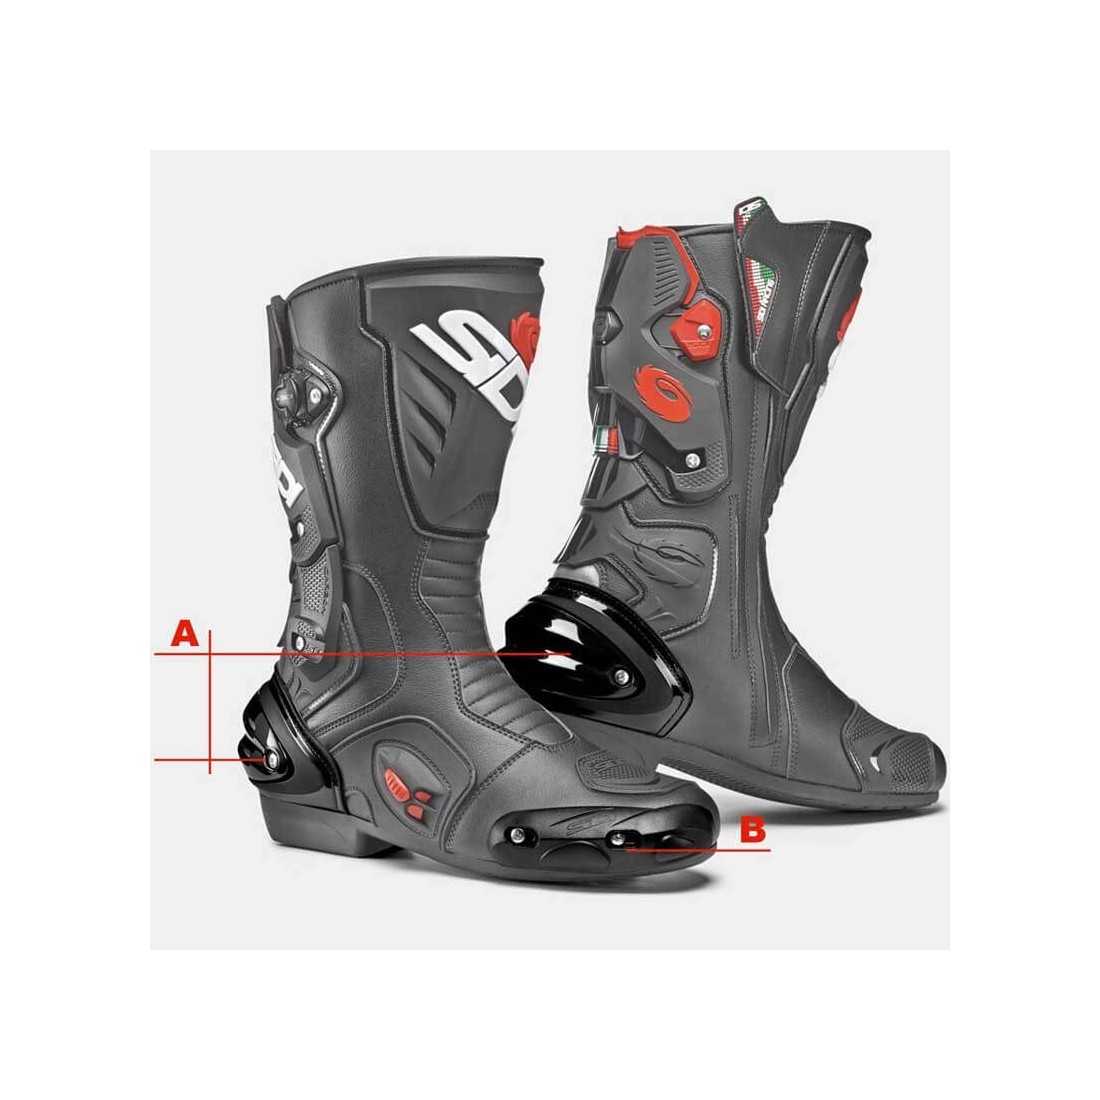 SIDI Roarr Black/Red/Black Sports Touring Motorcycle Boot CHEAPEST ON